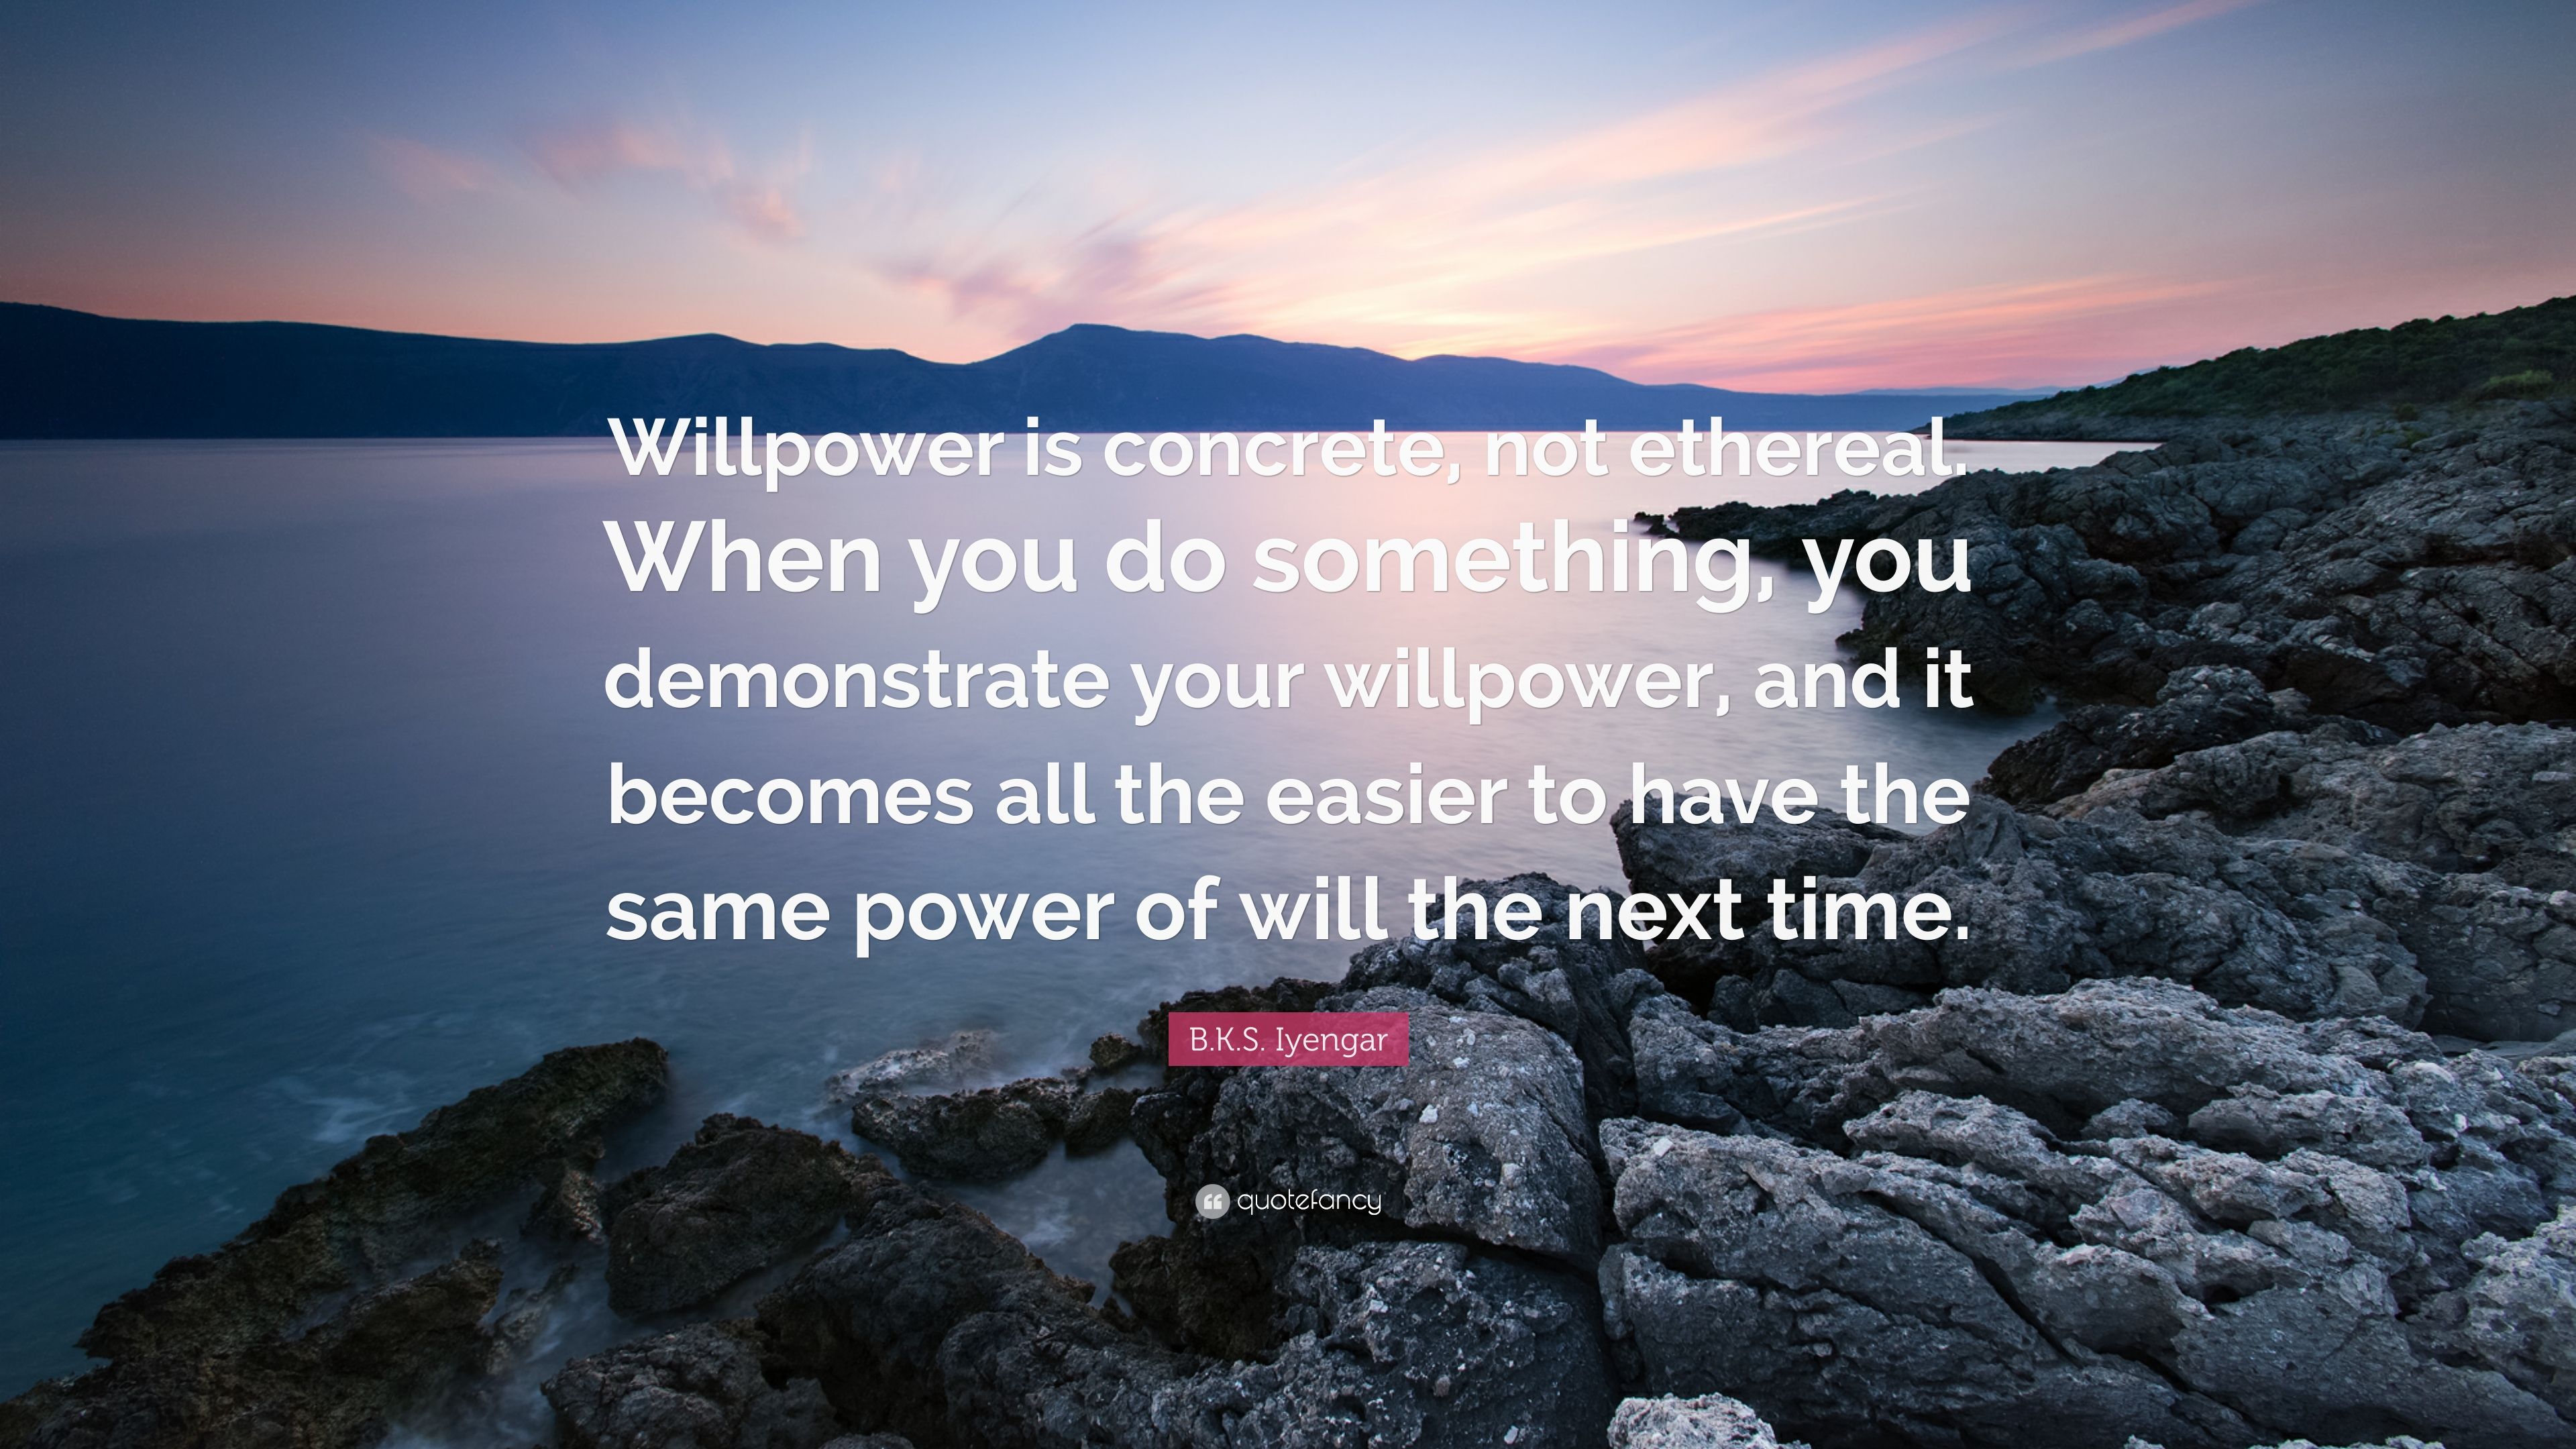 B.K.S. Iyengar Quote: “Willpower is concrete, not ethereal. When you do something, you demonstrate your willpower, and it becomes all the easie.”